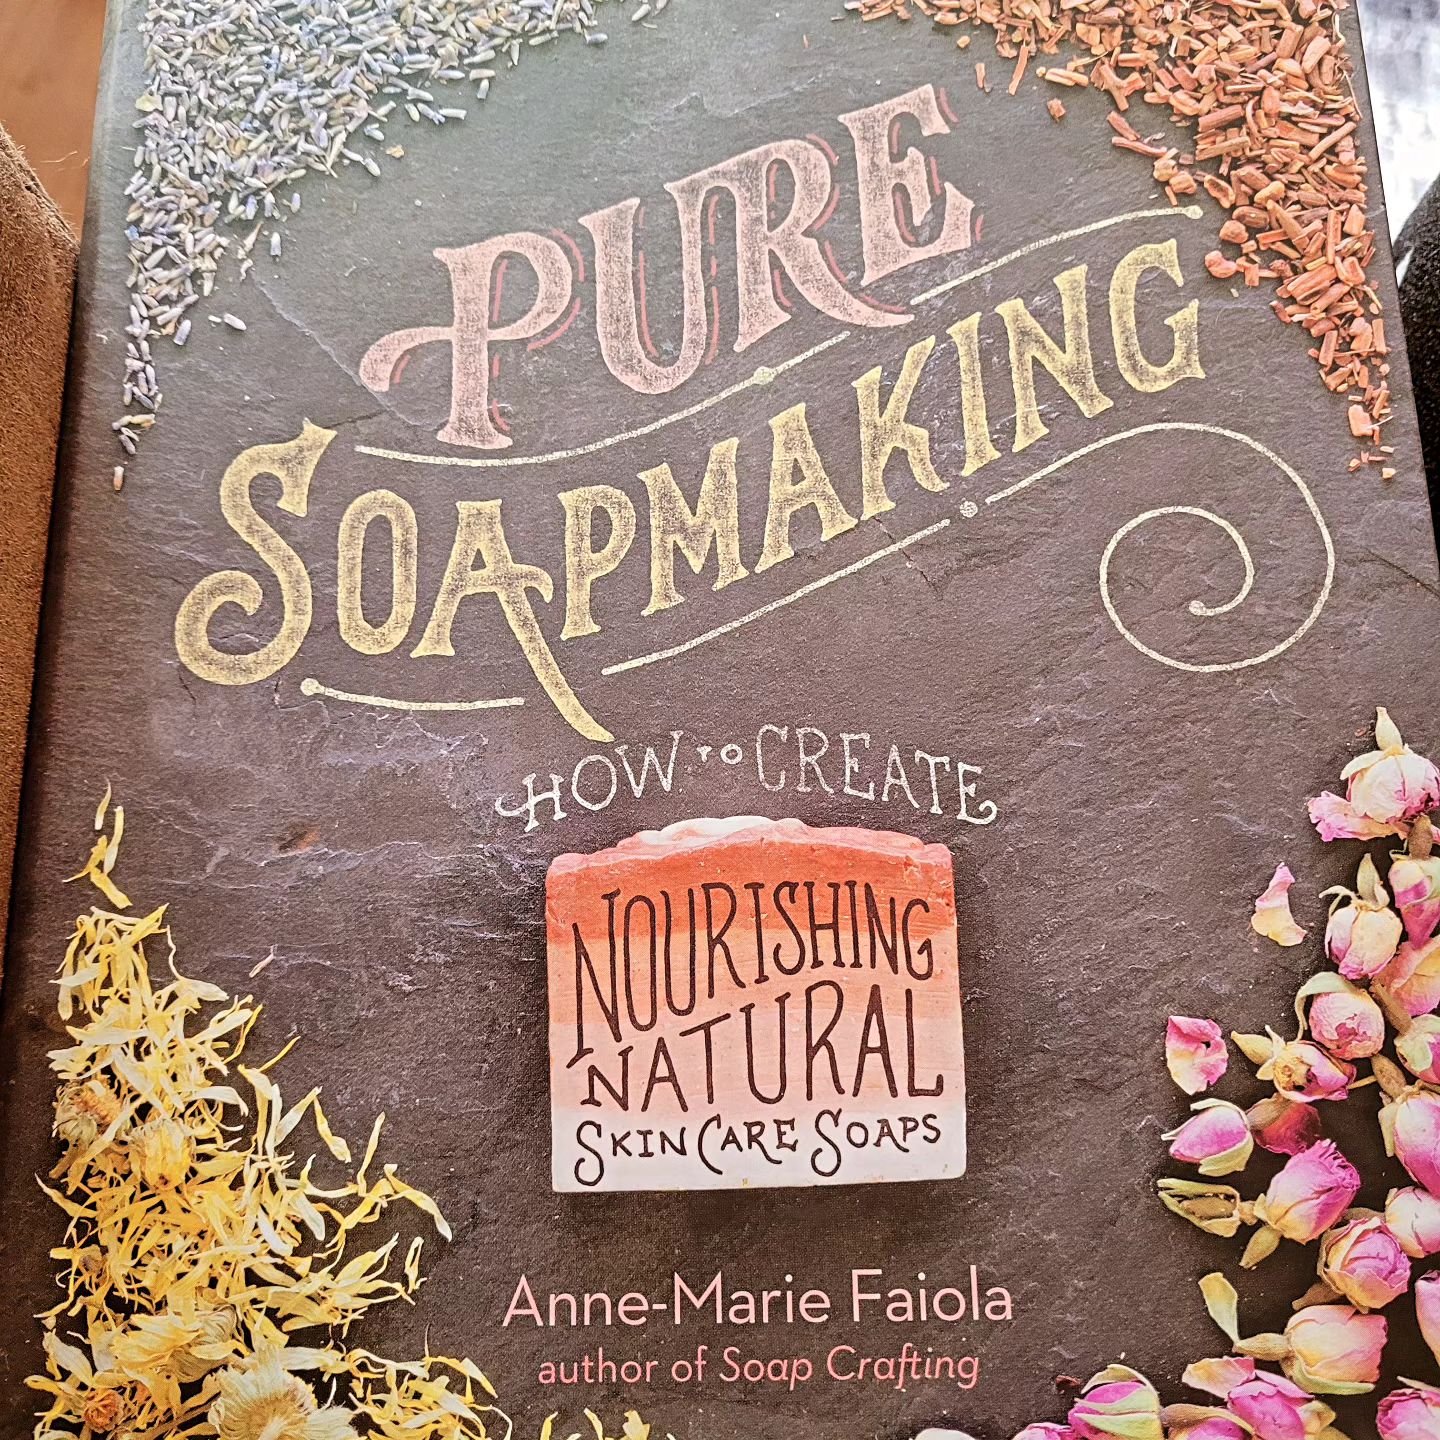 🌿✨ Thrilled to dive into the world of all-natural soap making with this gem from @brambleberry! 📚🛁 Just like that iconic movie where she cooked her way through Julia Child's cookbook, I'm embarking on a journey to craft a new soap recipe each week